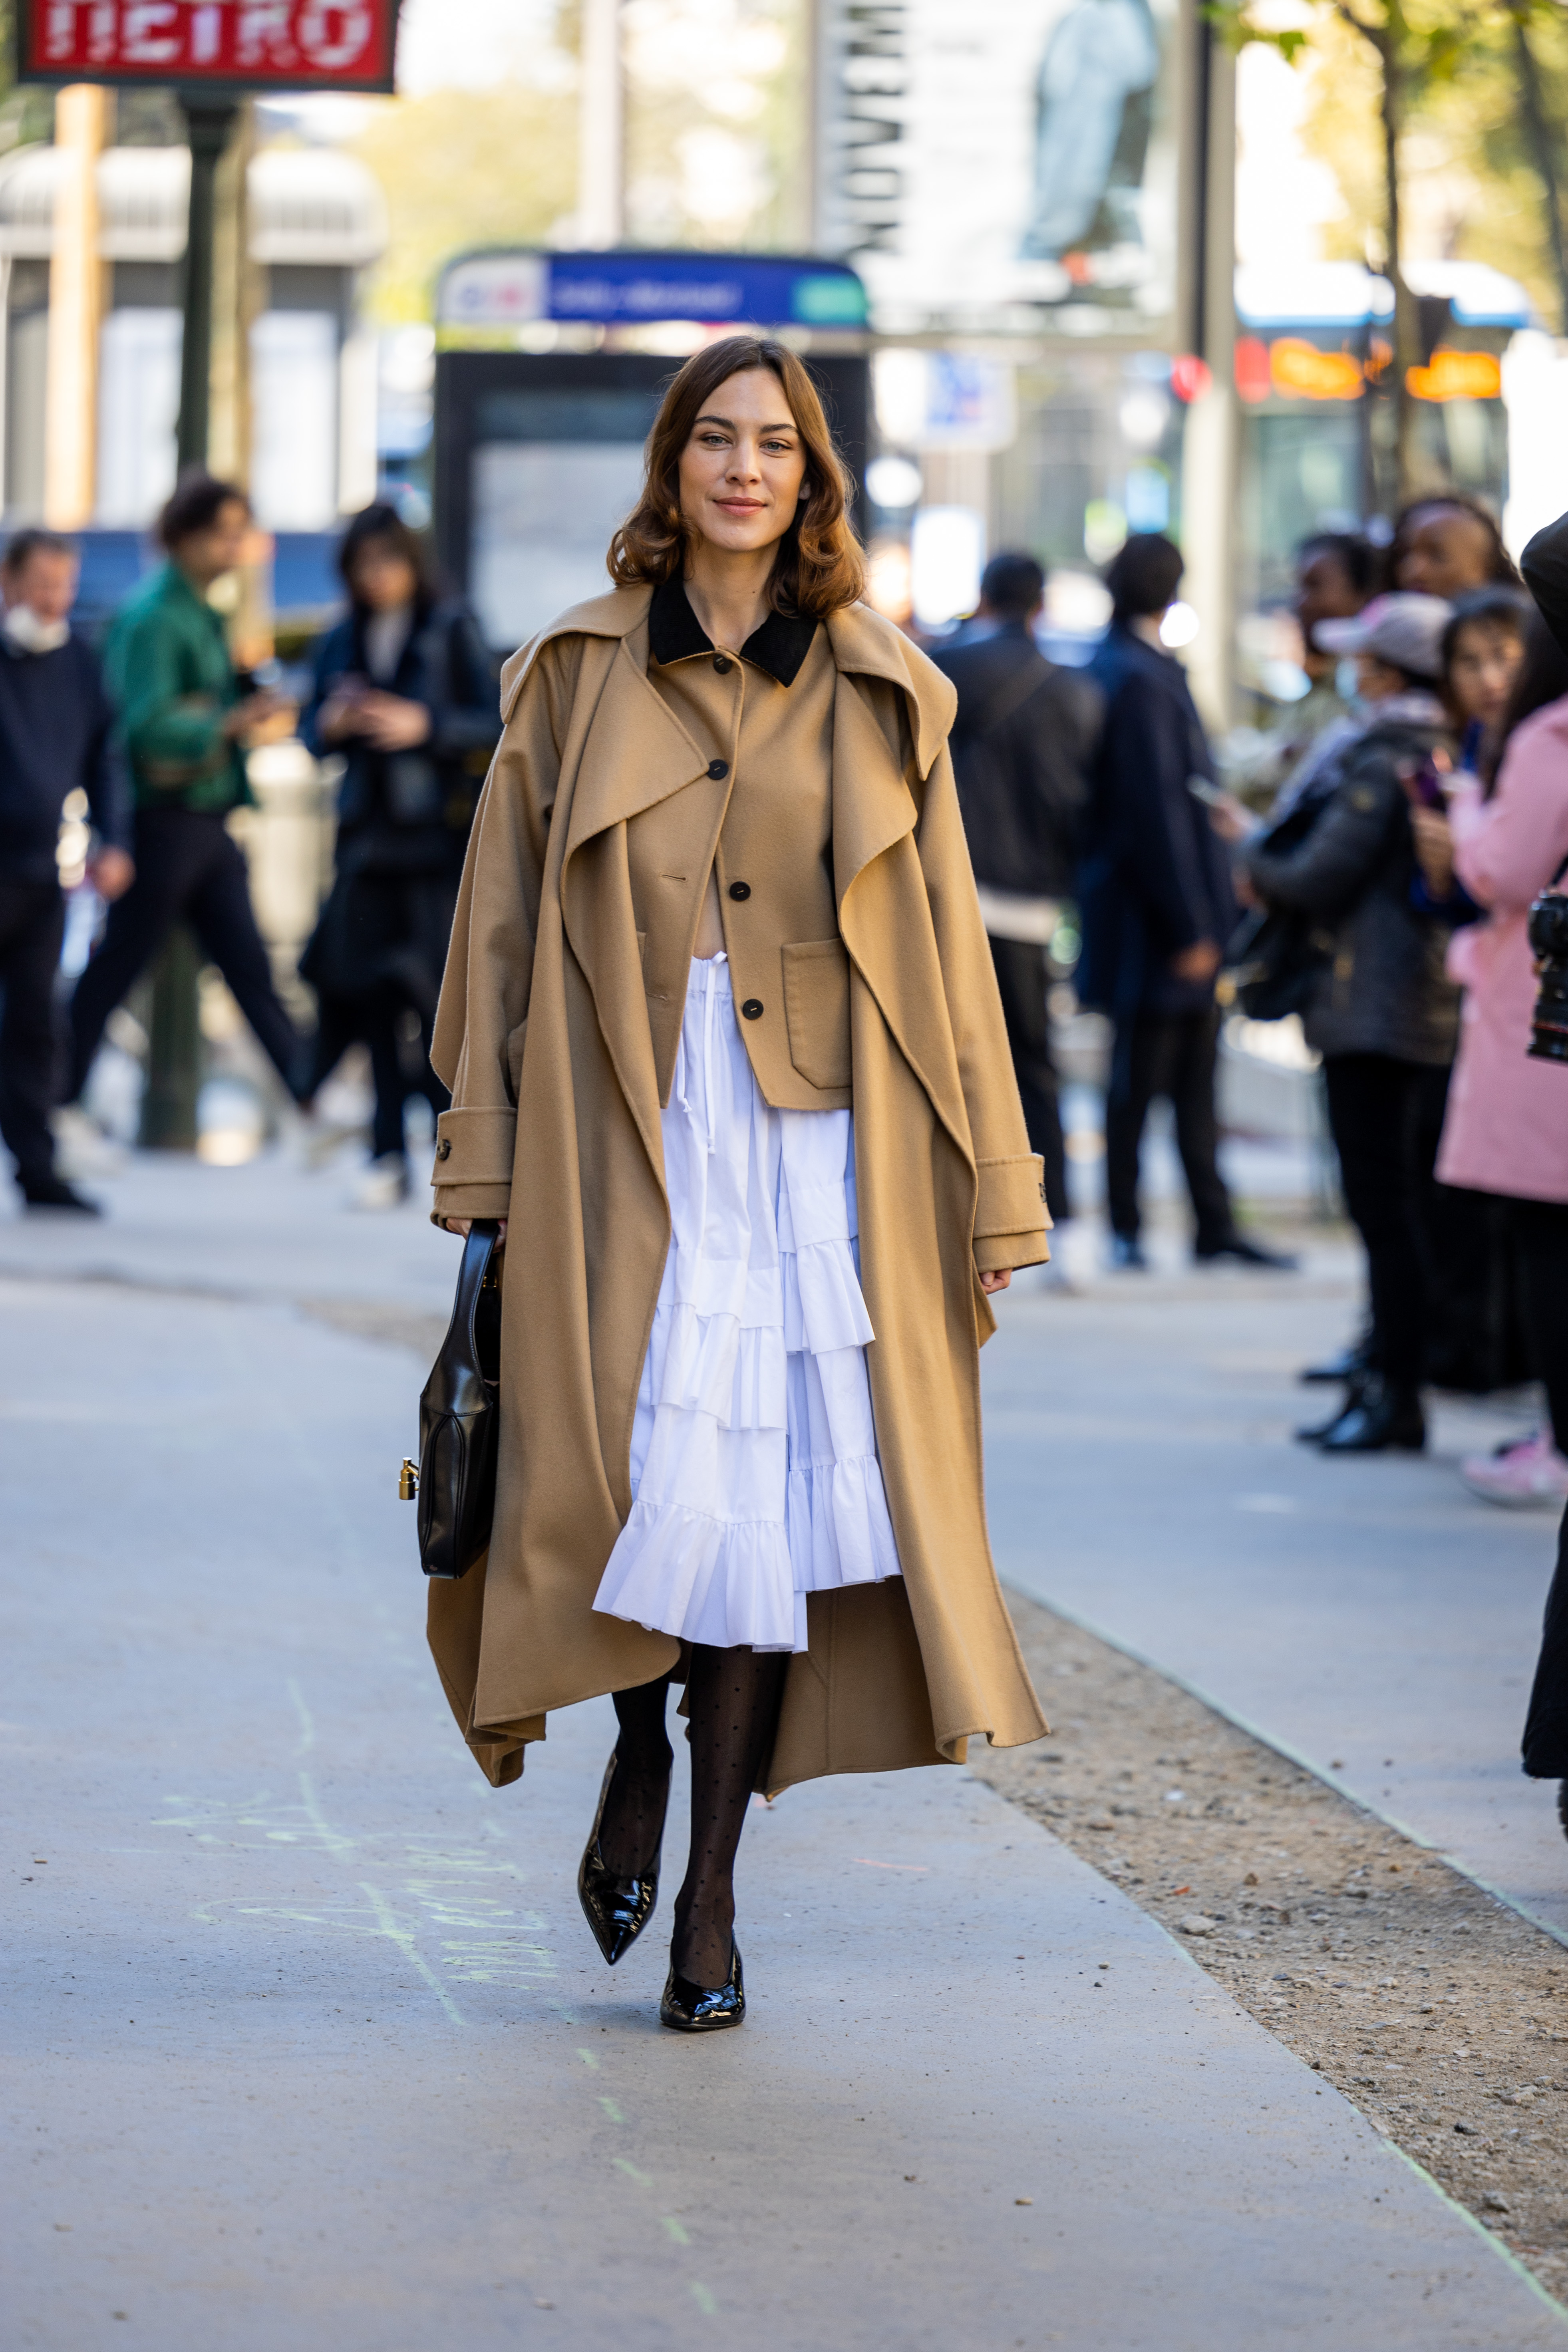 Celebrity Skirt Outfits: Alexa Chung wears a white skirt with a trench coat